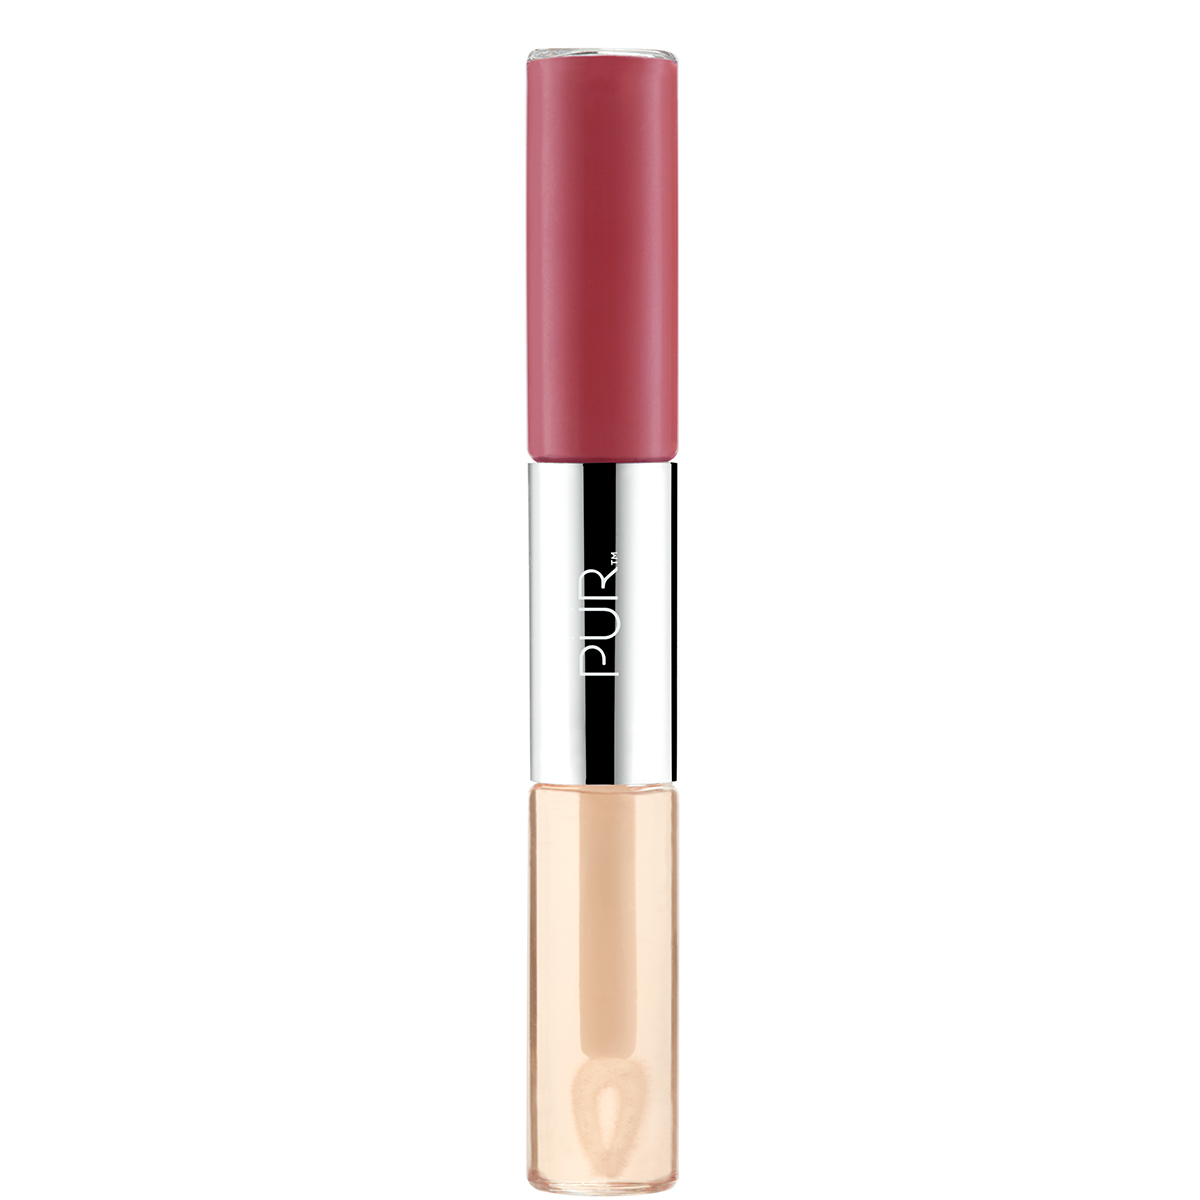 Pur 4-in-1 Lip Duo